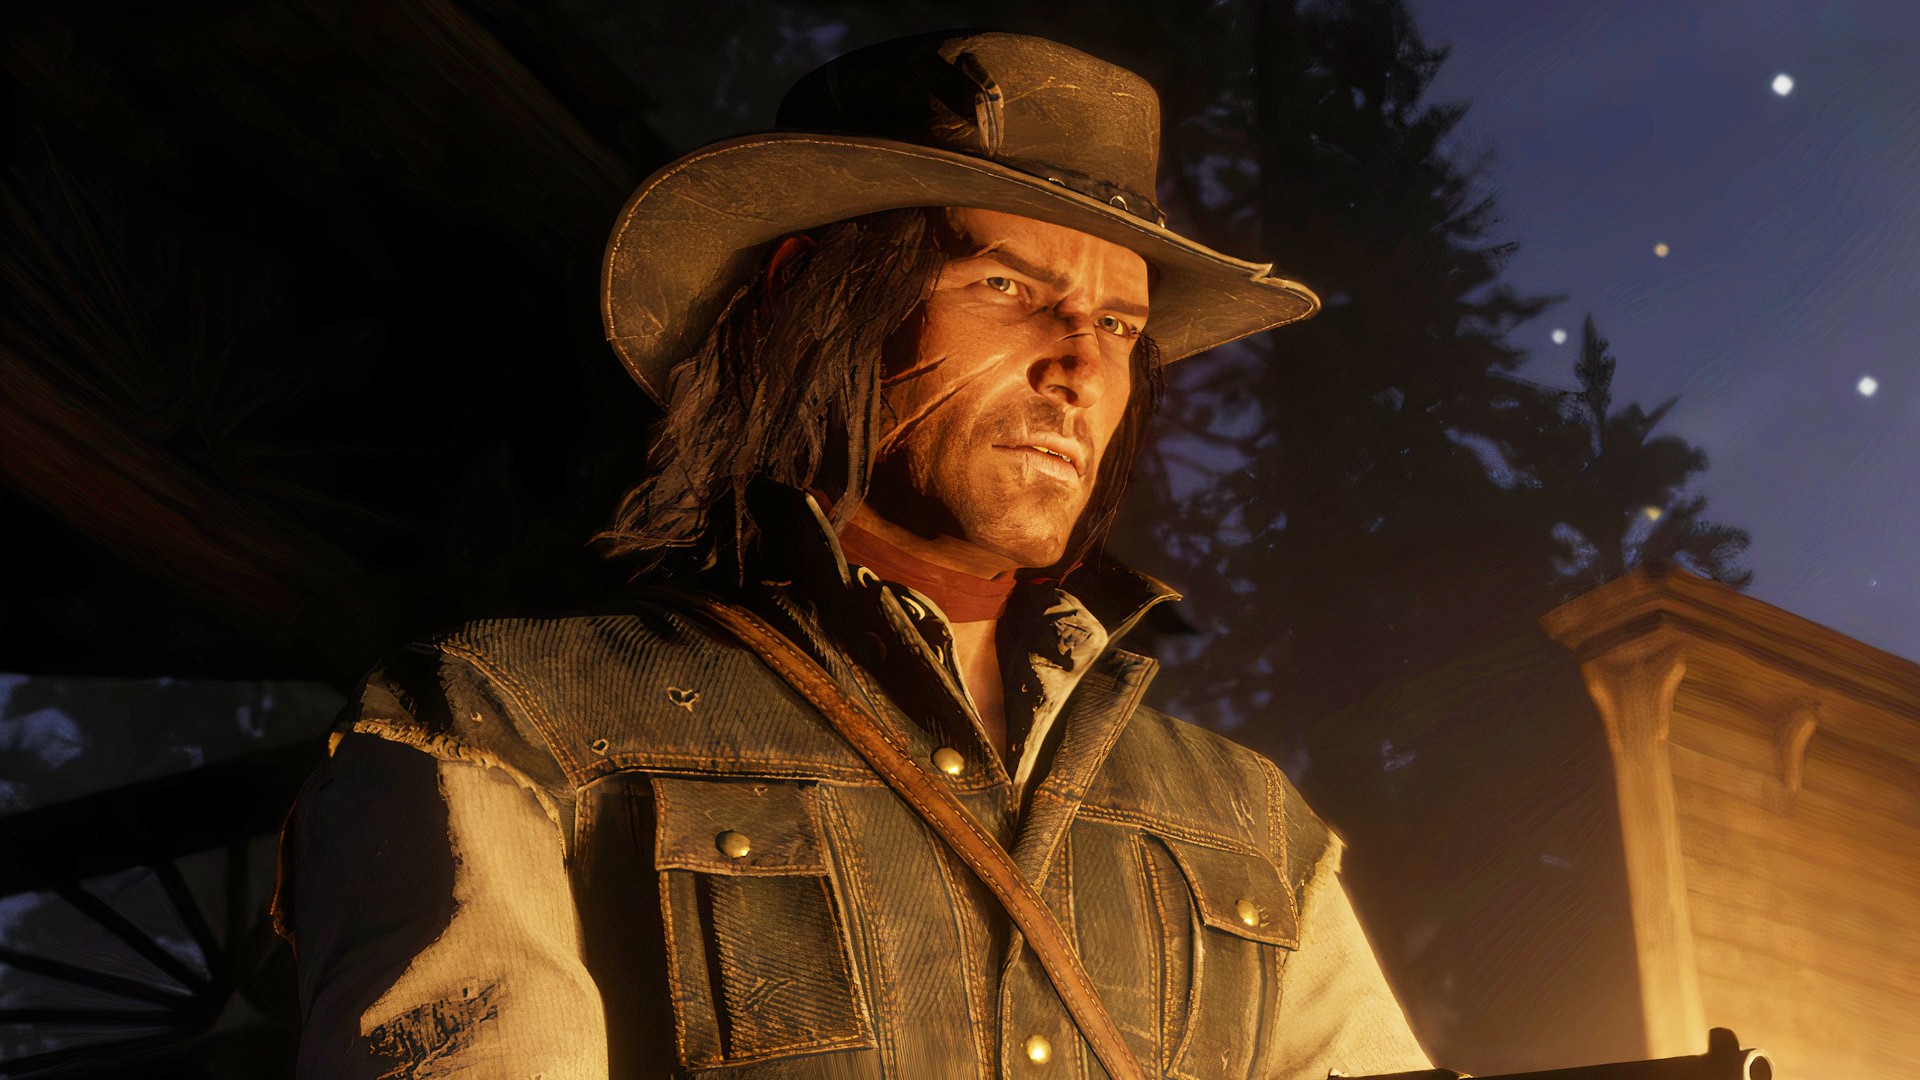 Making games like Red Dead Redemption 2 shouldn't be such hard